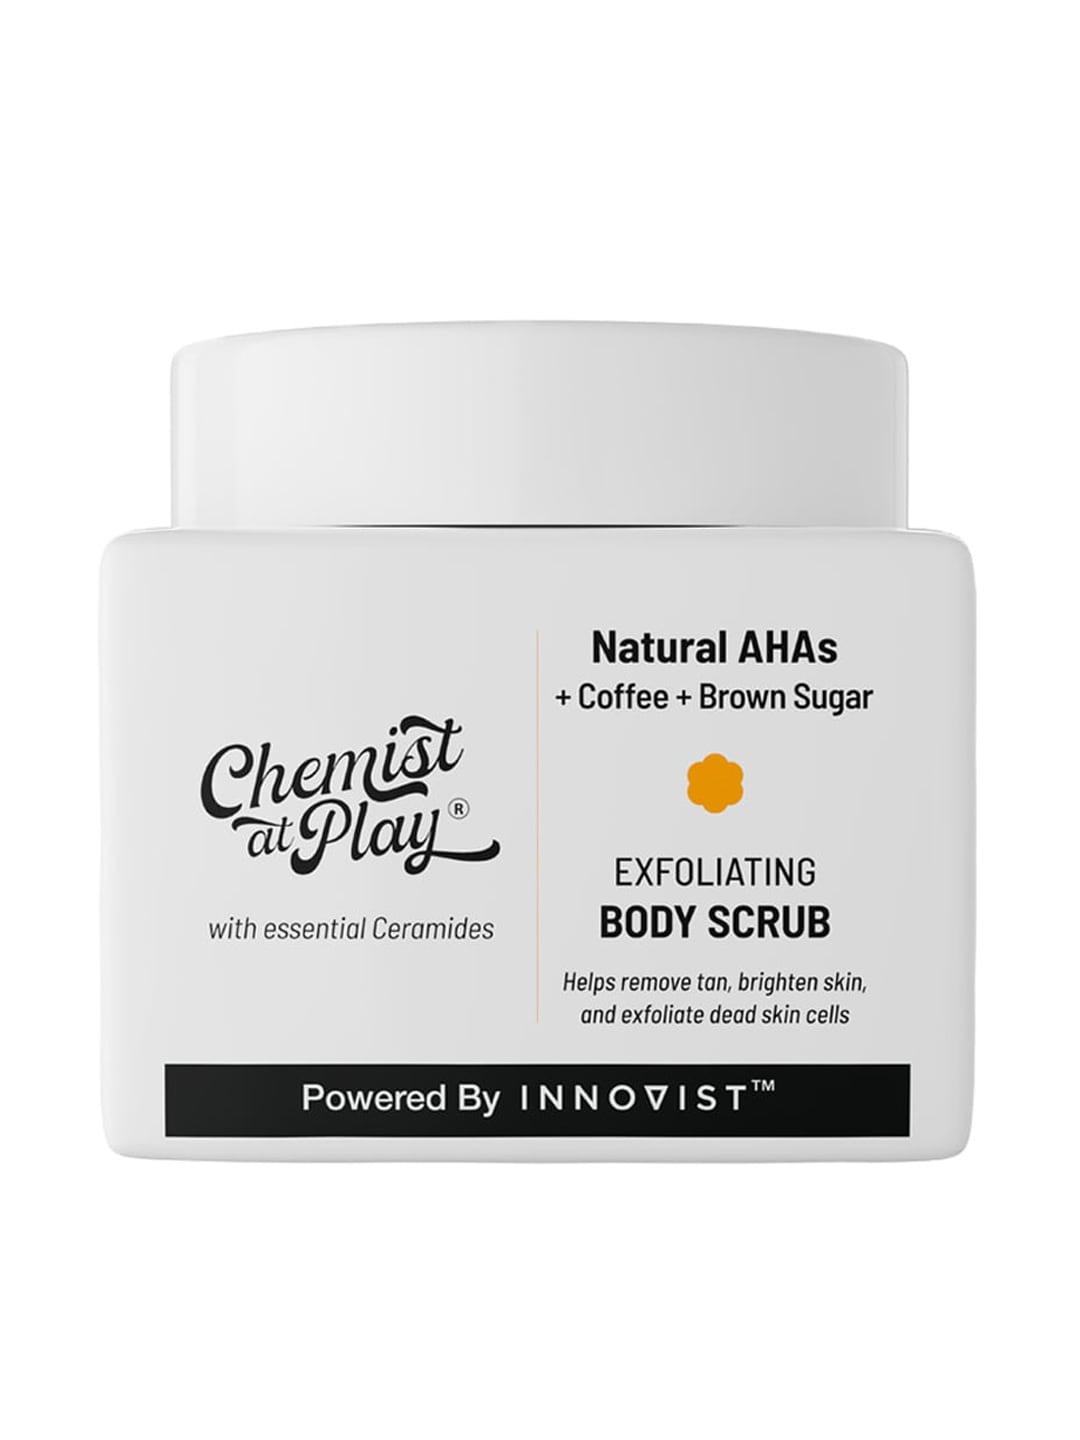 Chemist at Play Natural AHAs Exfoliating Body Scrub With Coffee & Brown Sugar - 75g